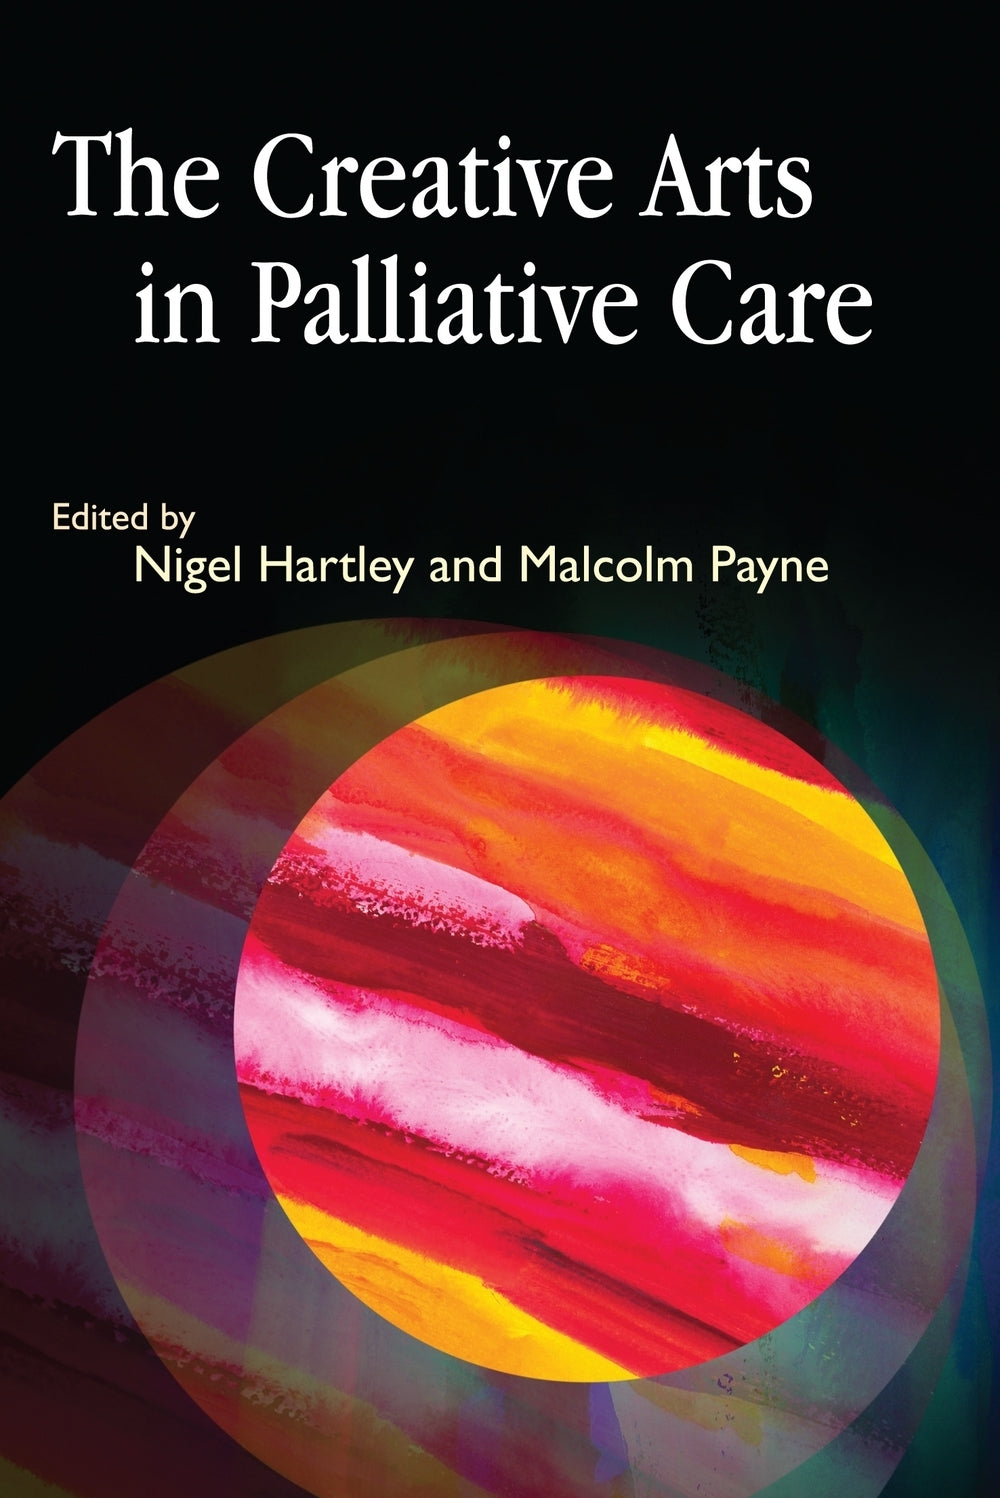 The Creative Arts in Palliative Care by Nigel Hartley, Malcolm Payne, No Author Listed